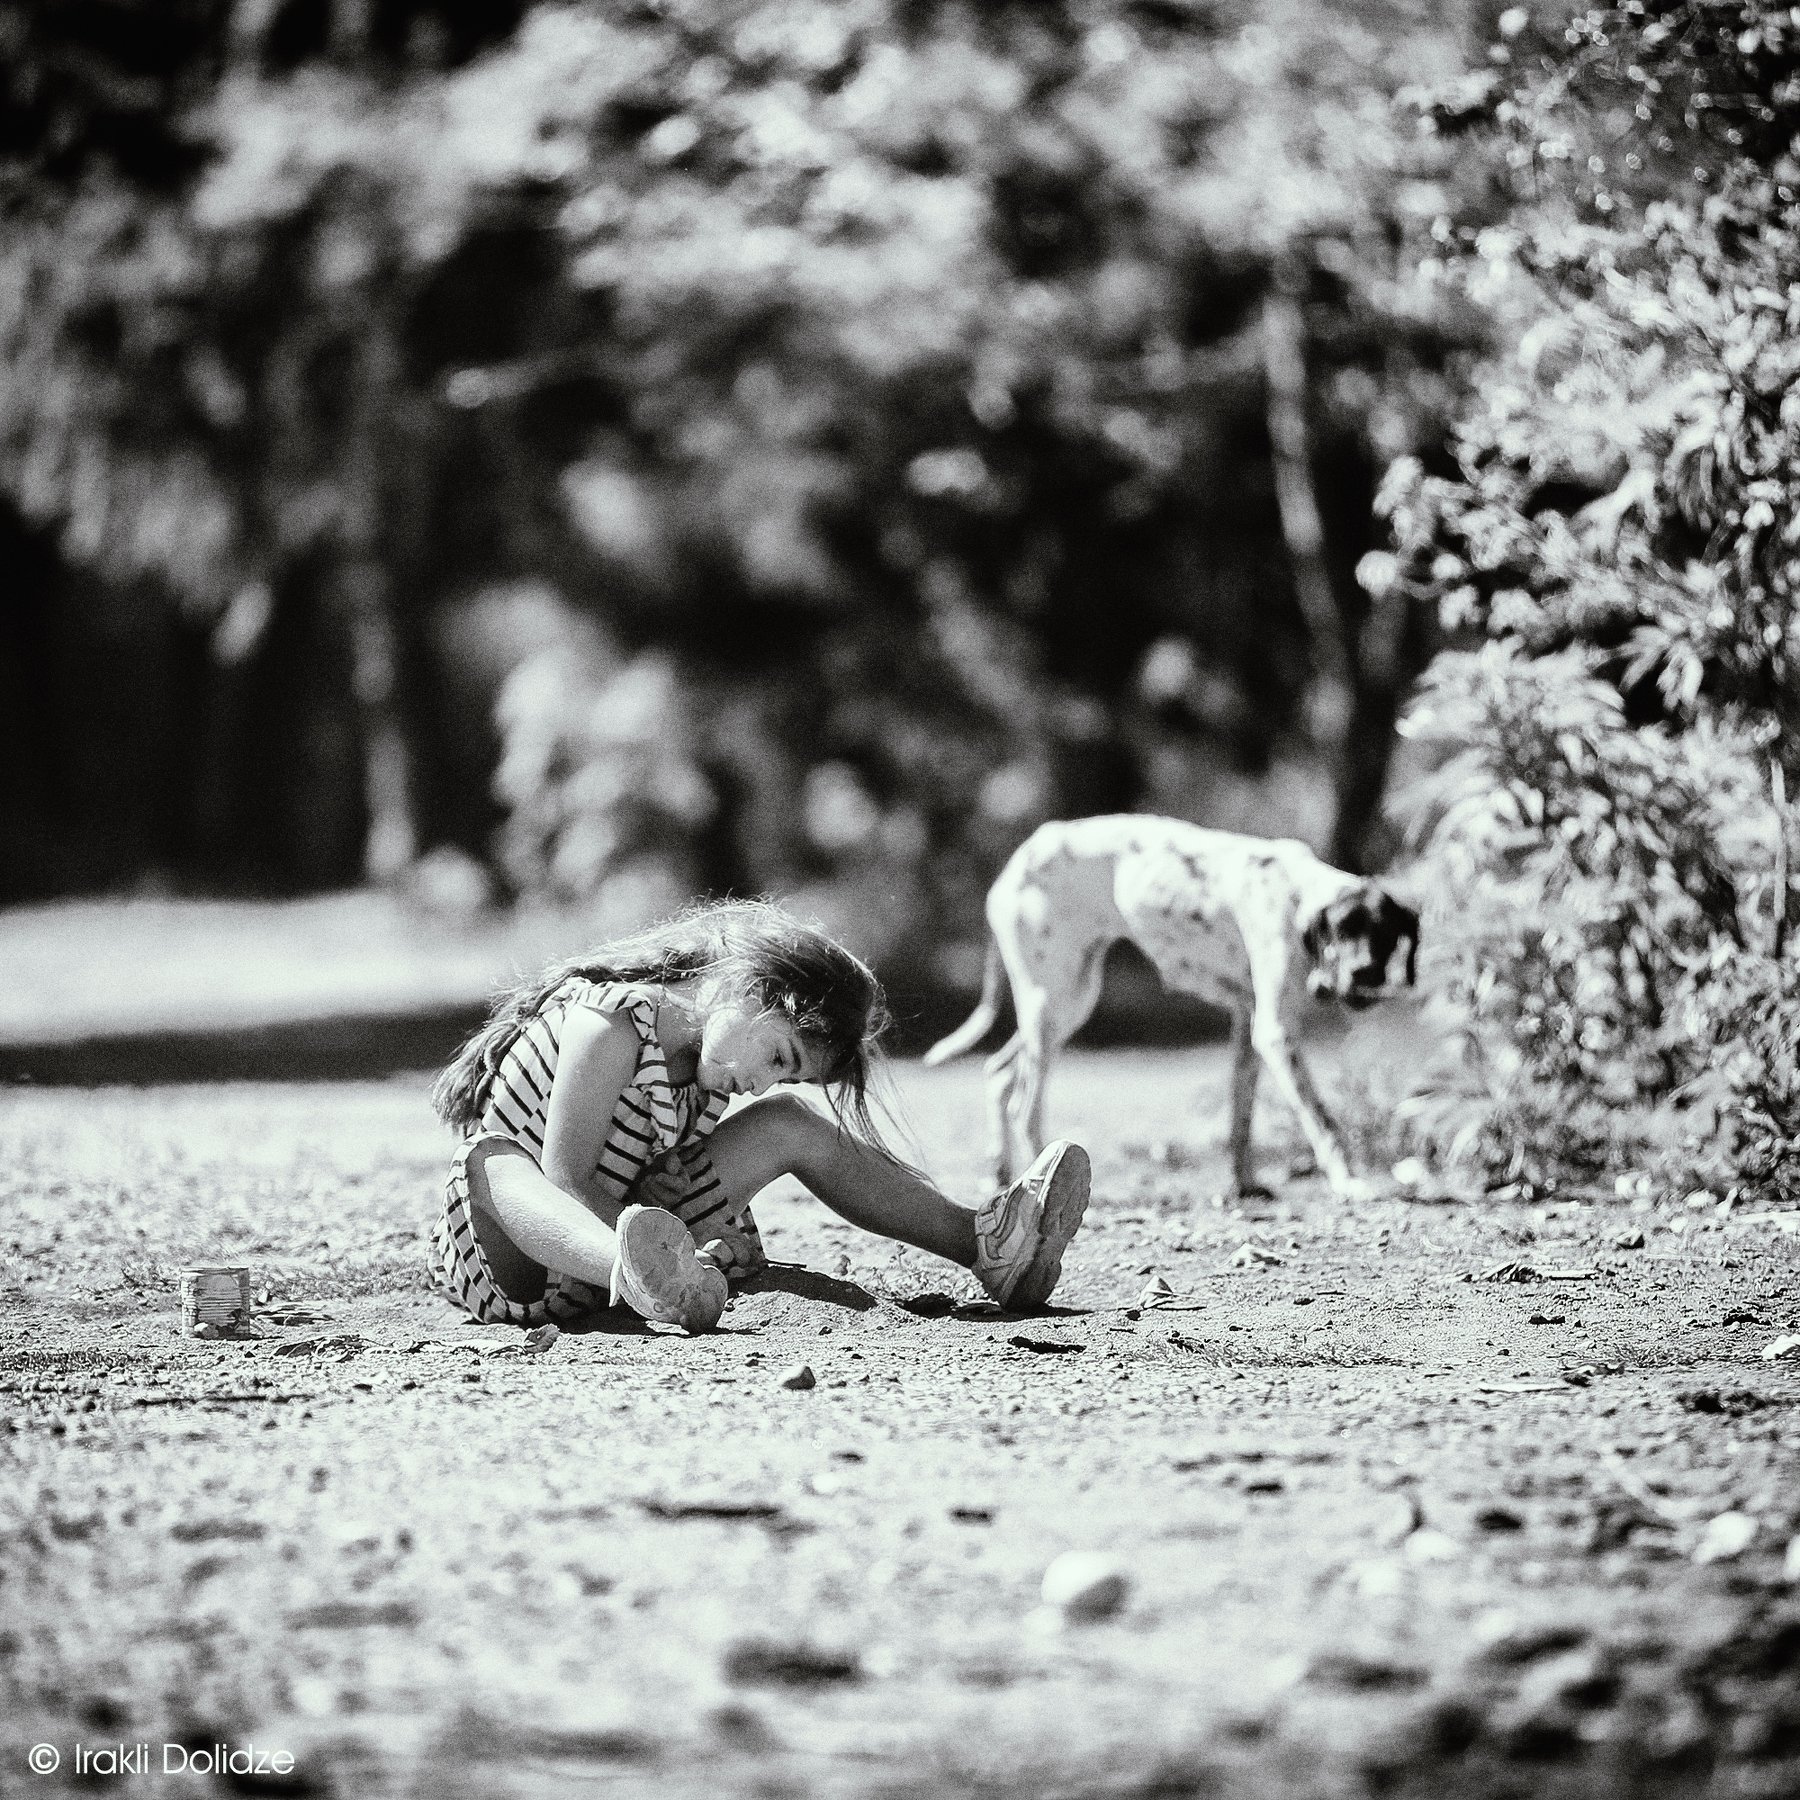 black and white, b&w, girl, dog, hungry, playing time, outdoor, ირაკლი დოლიძე